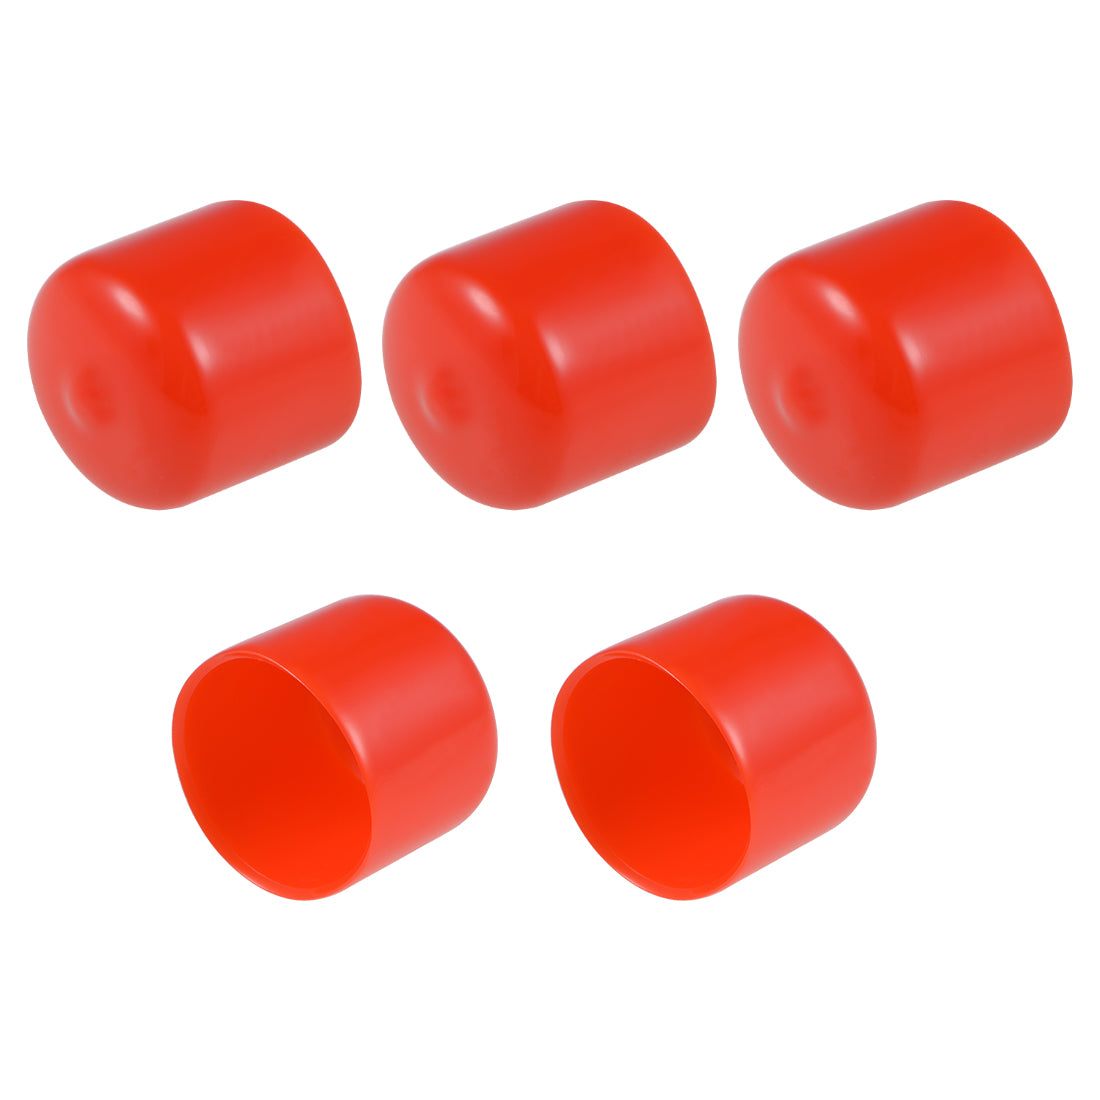 uxcell Uxcell Screw Thread Protector, 26mm ID Round End Cap Cover Red Tube Caps 5pcs